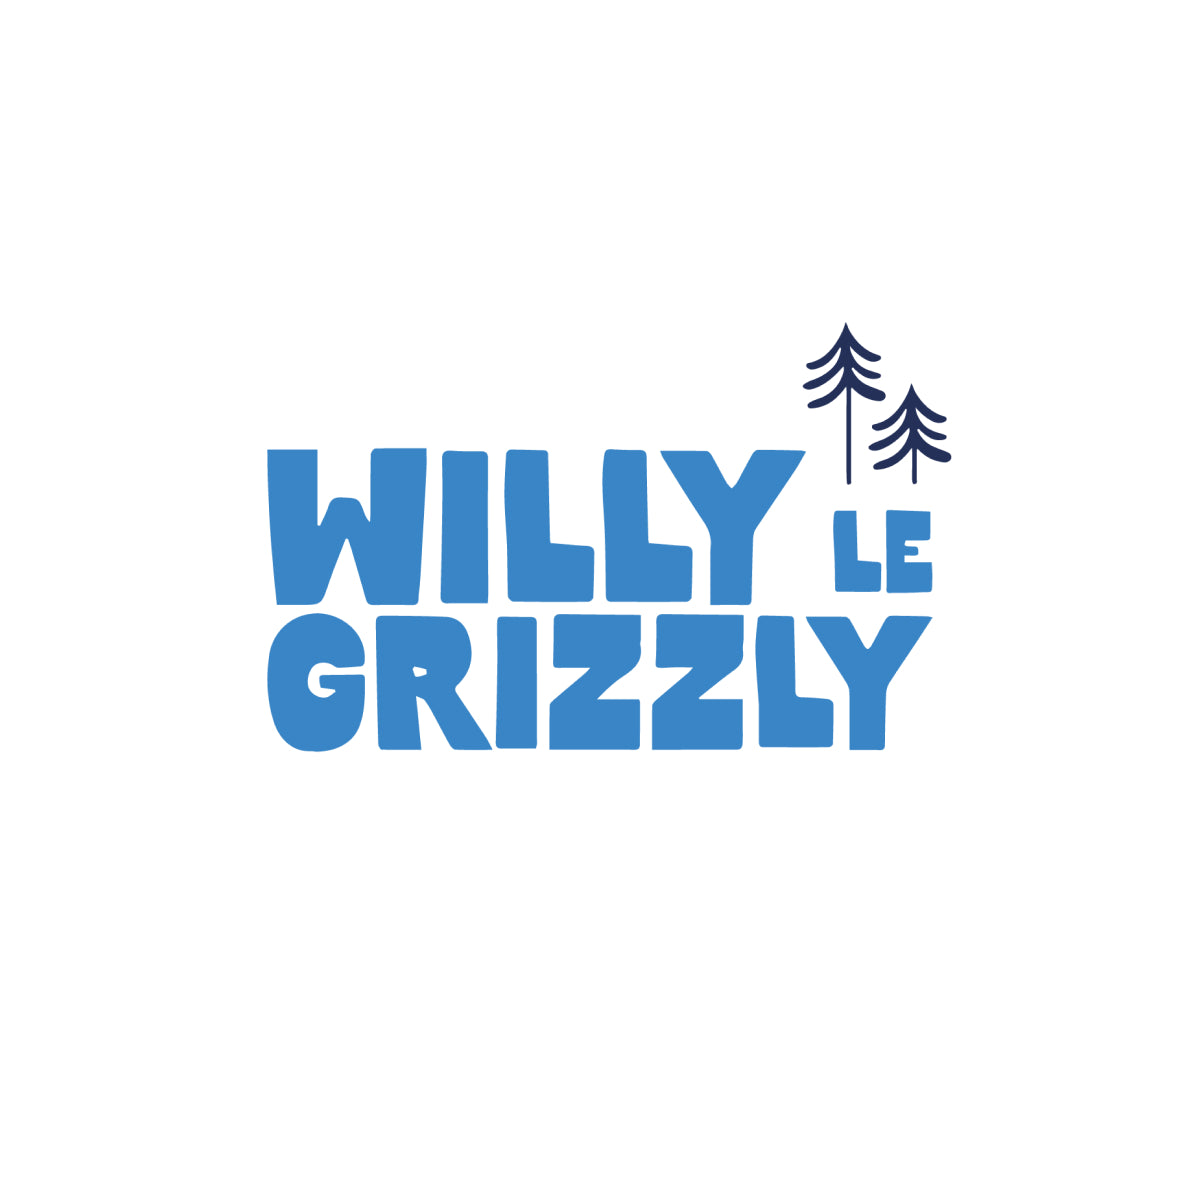 Willy the grizzly dog bandana